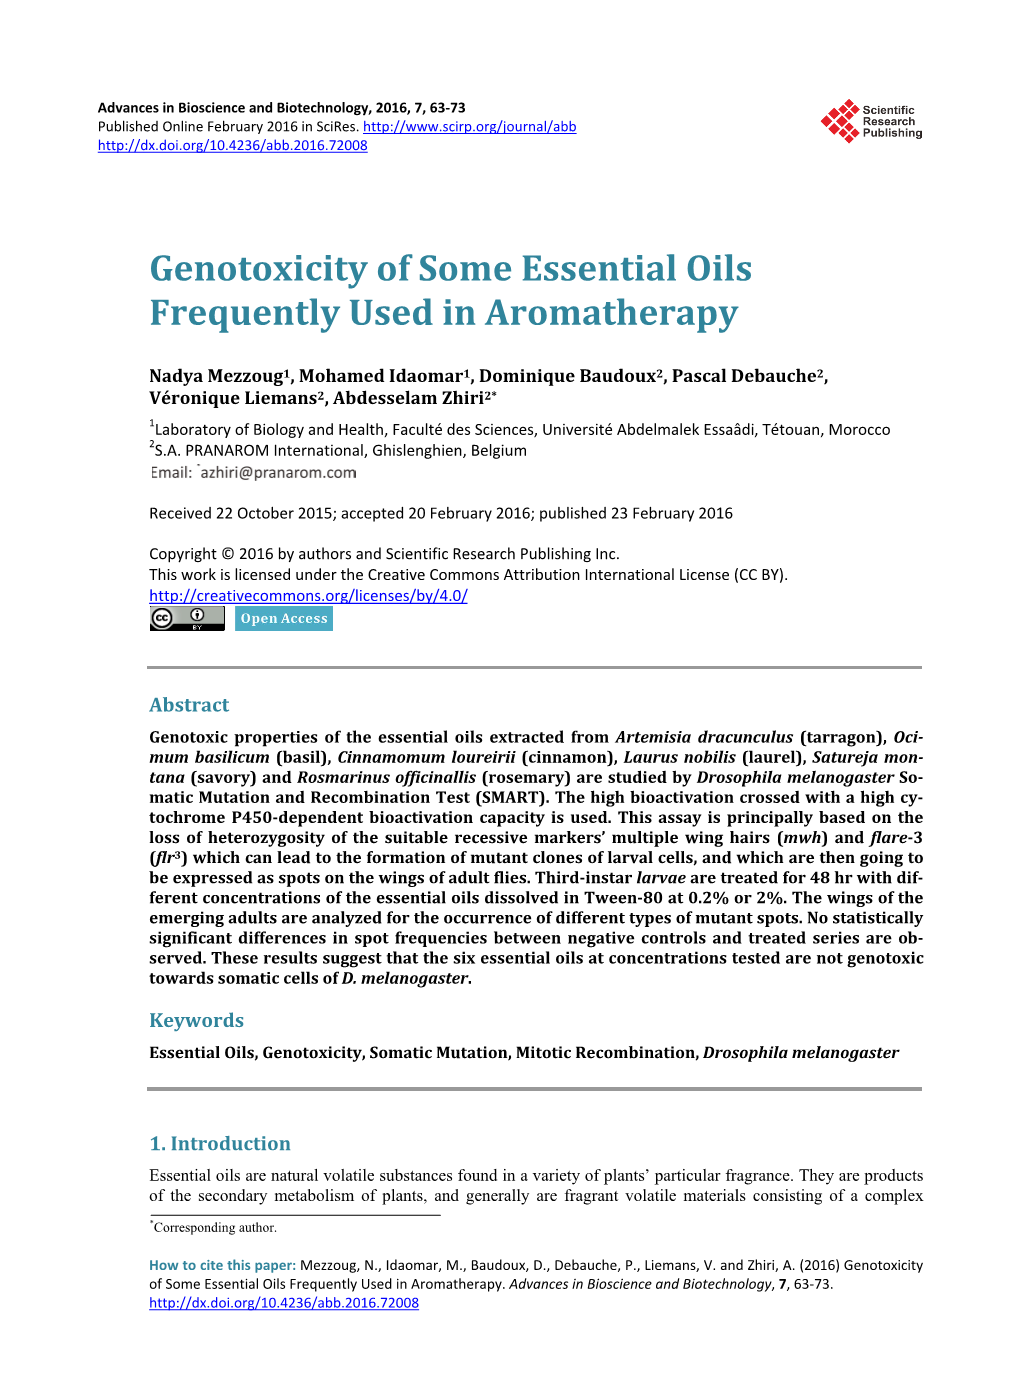 Genotoxicity of Some Essential Oils Frequently Used in Aromatherapy